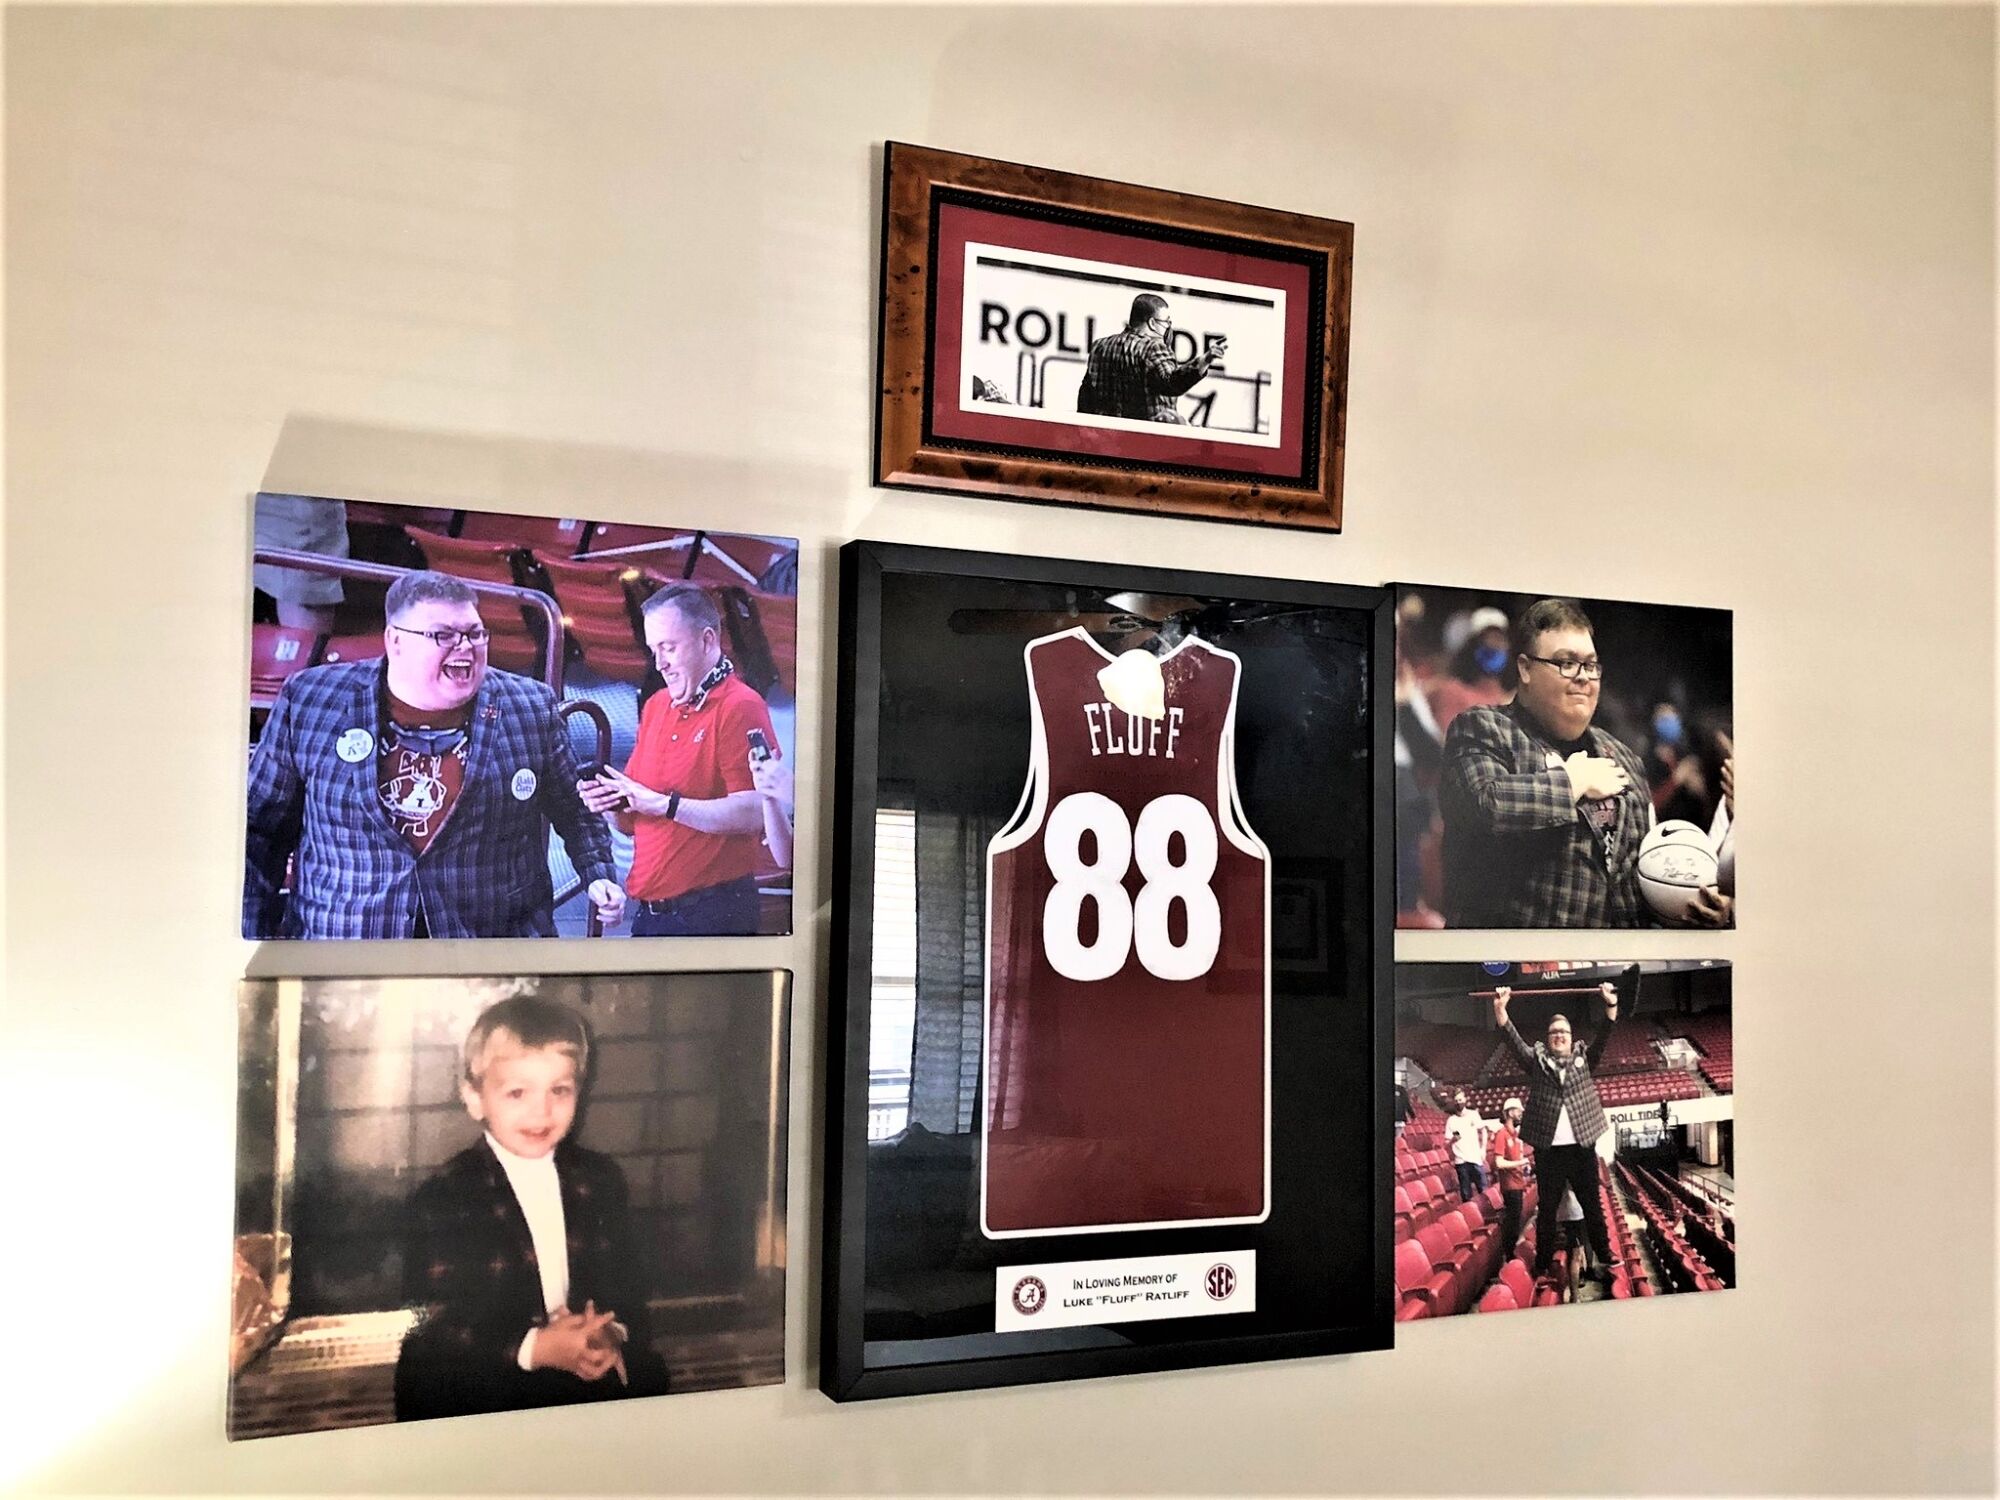 A "Fluff" jersey is framed on the wall with photos of Luke Ratliff.